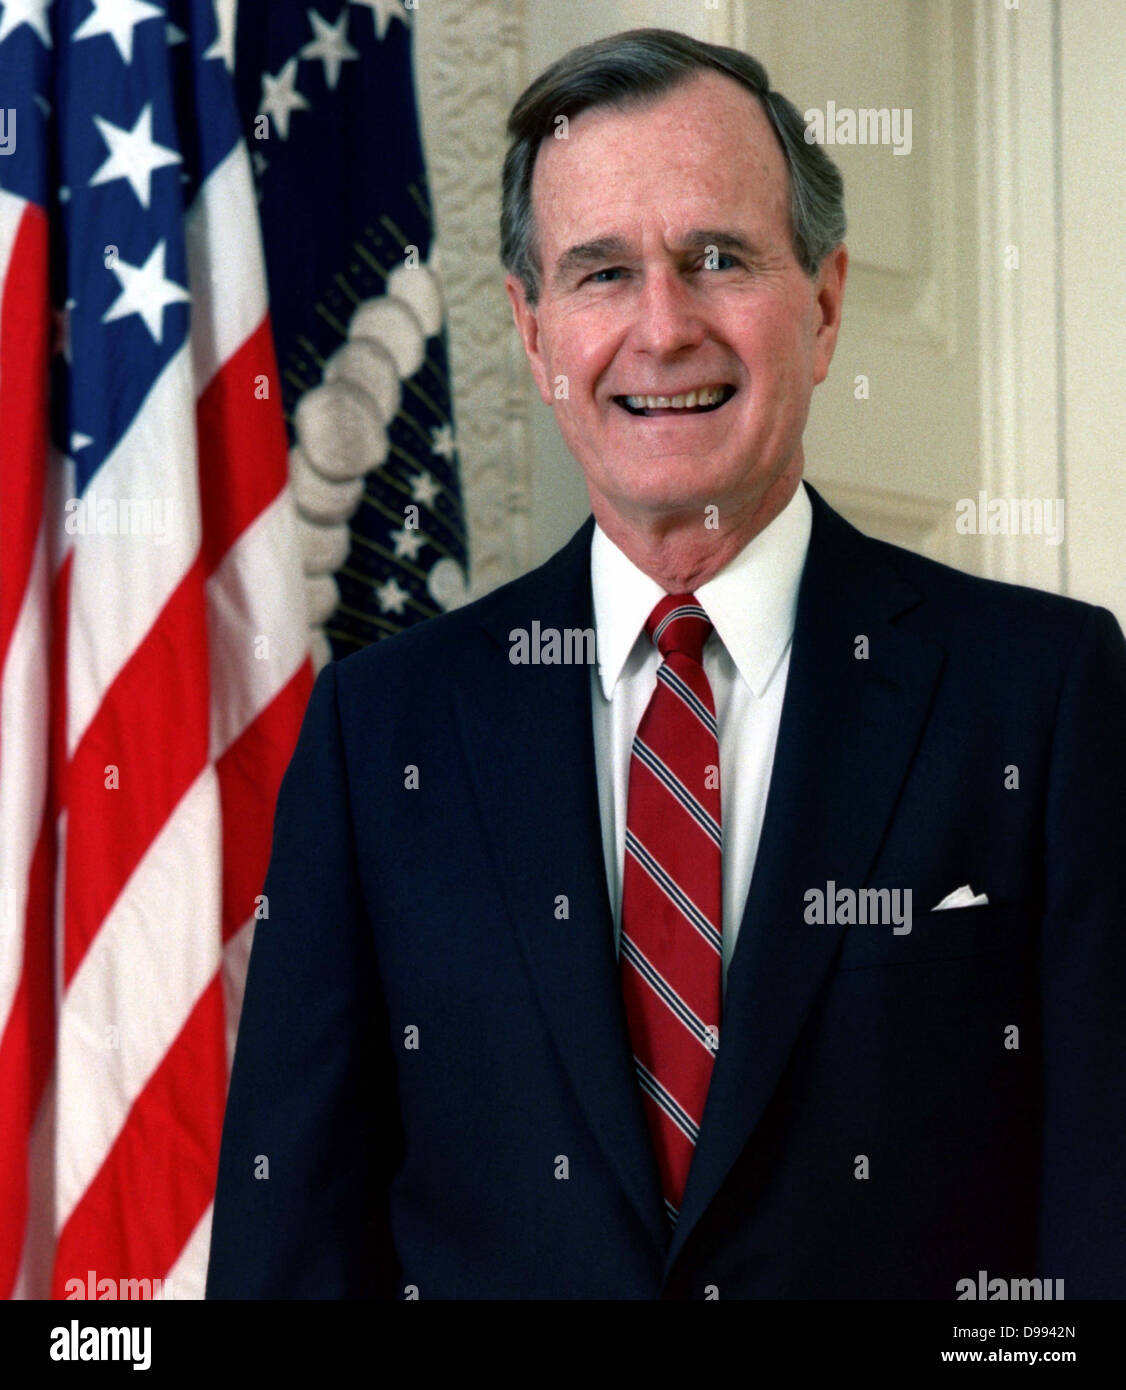 George Herbert Walker Bush (born 1924) 41st President of the United States 1989–1993. Vice President 1981–1989. Head-and-shoulders portrait with stars-and-stripes in background. American Politician Republican Stock Photo